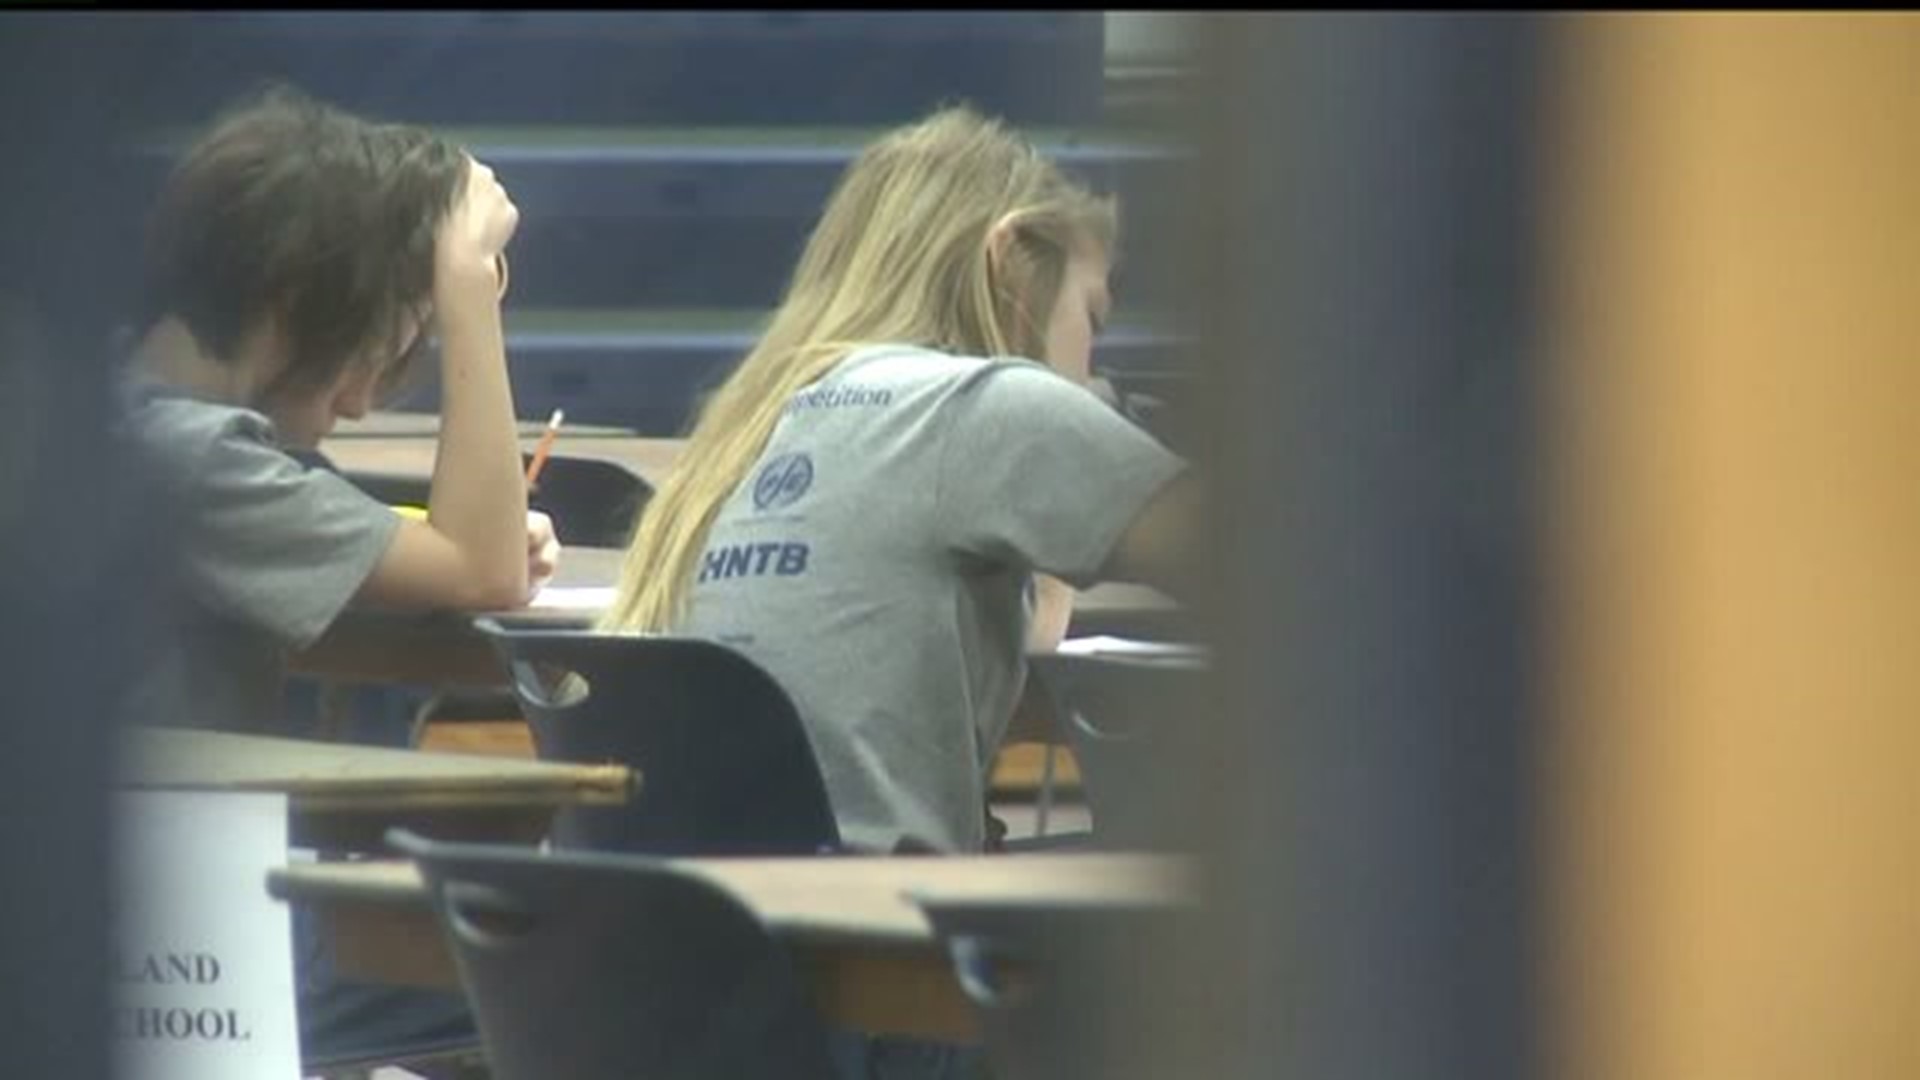 Local mathletes take part in 32nd annual Math-Counts event